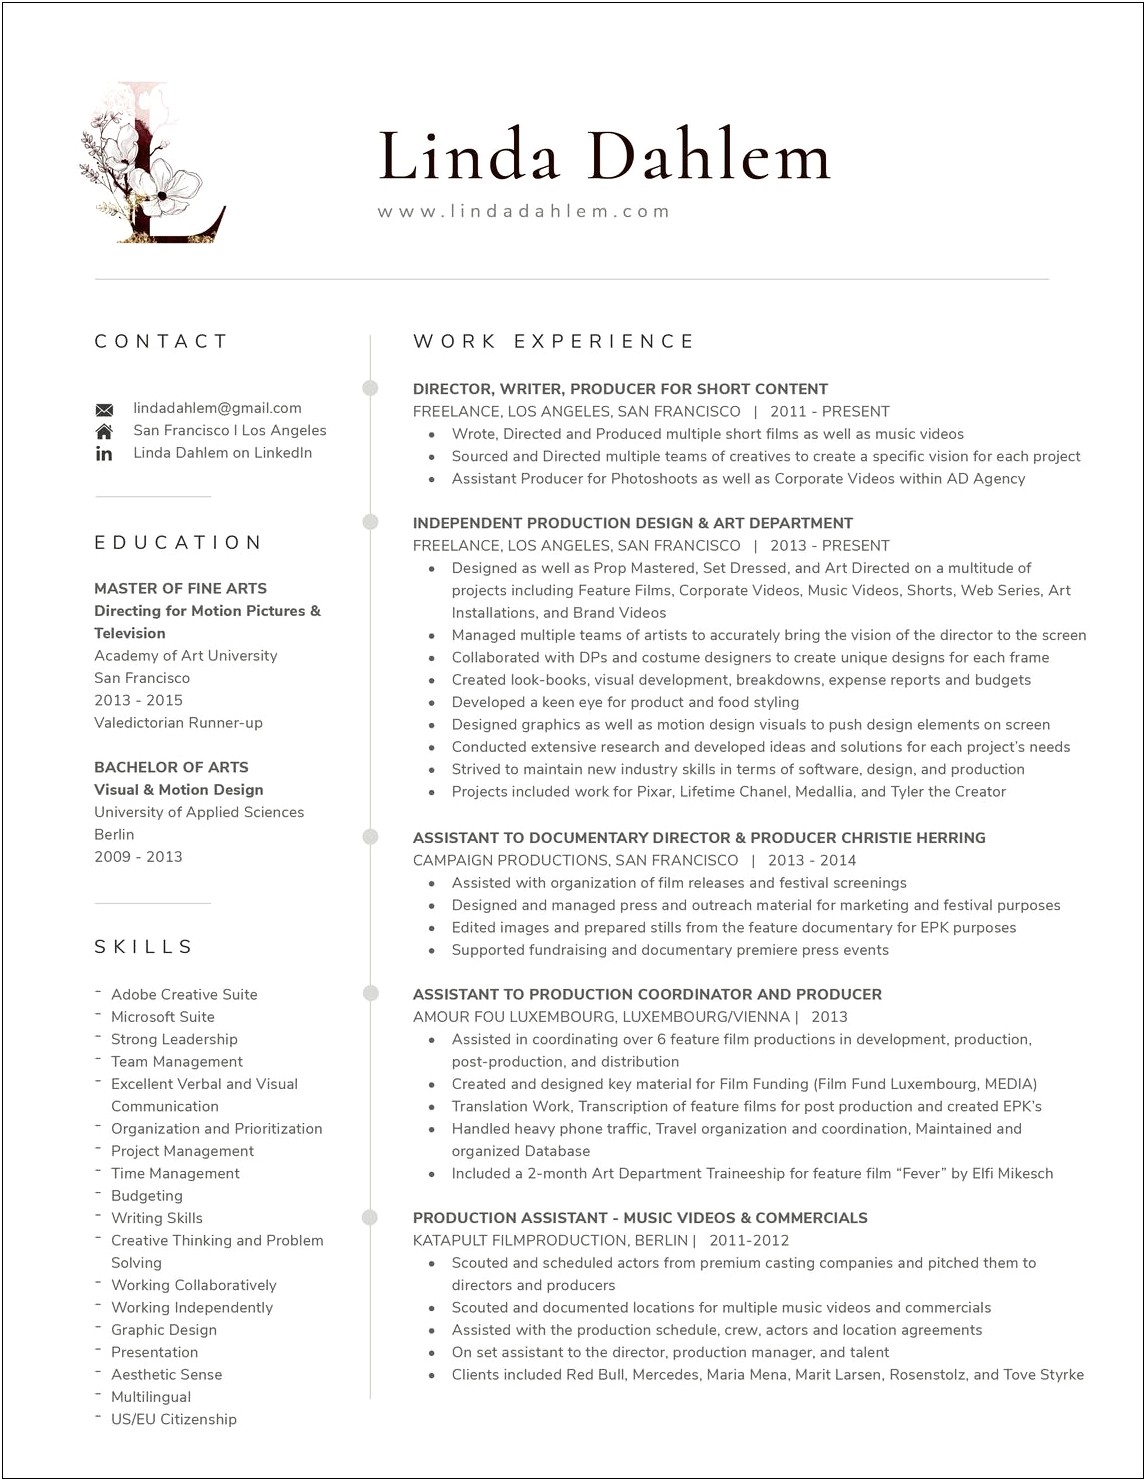 Where To Put Multilingual In Resume